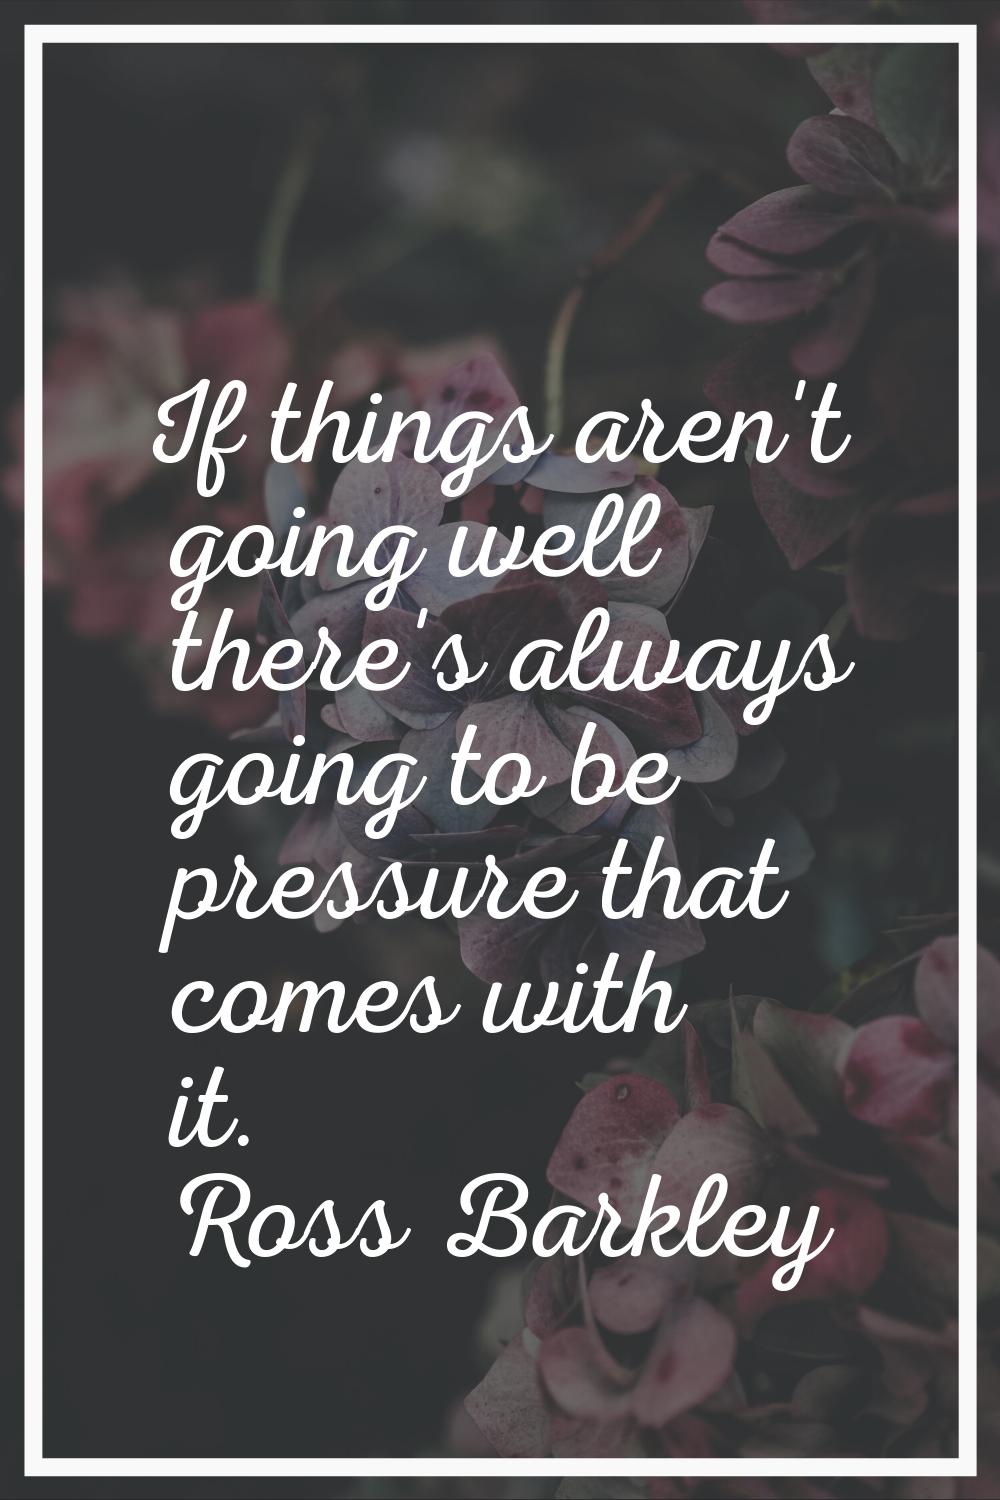 If things aren't going well there's always going to be pressure that comes with it.